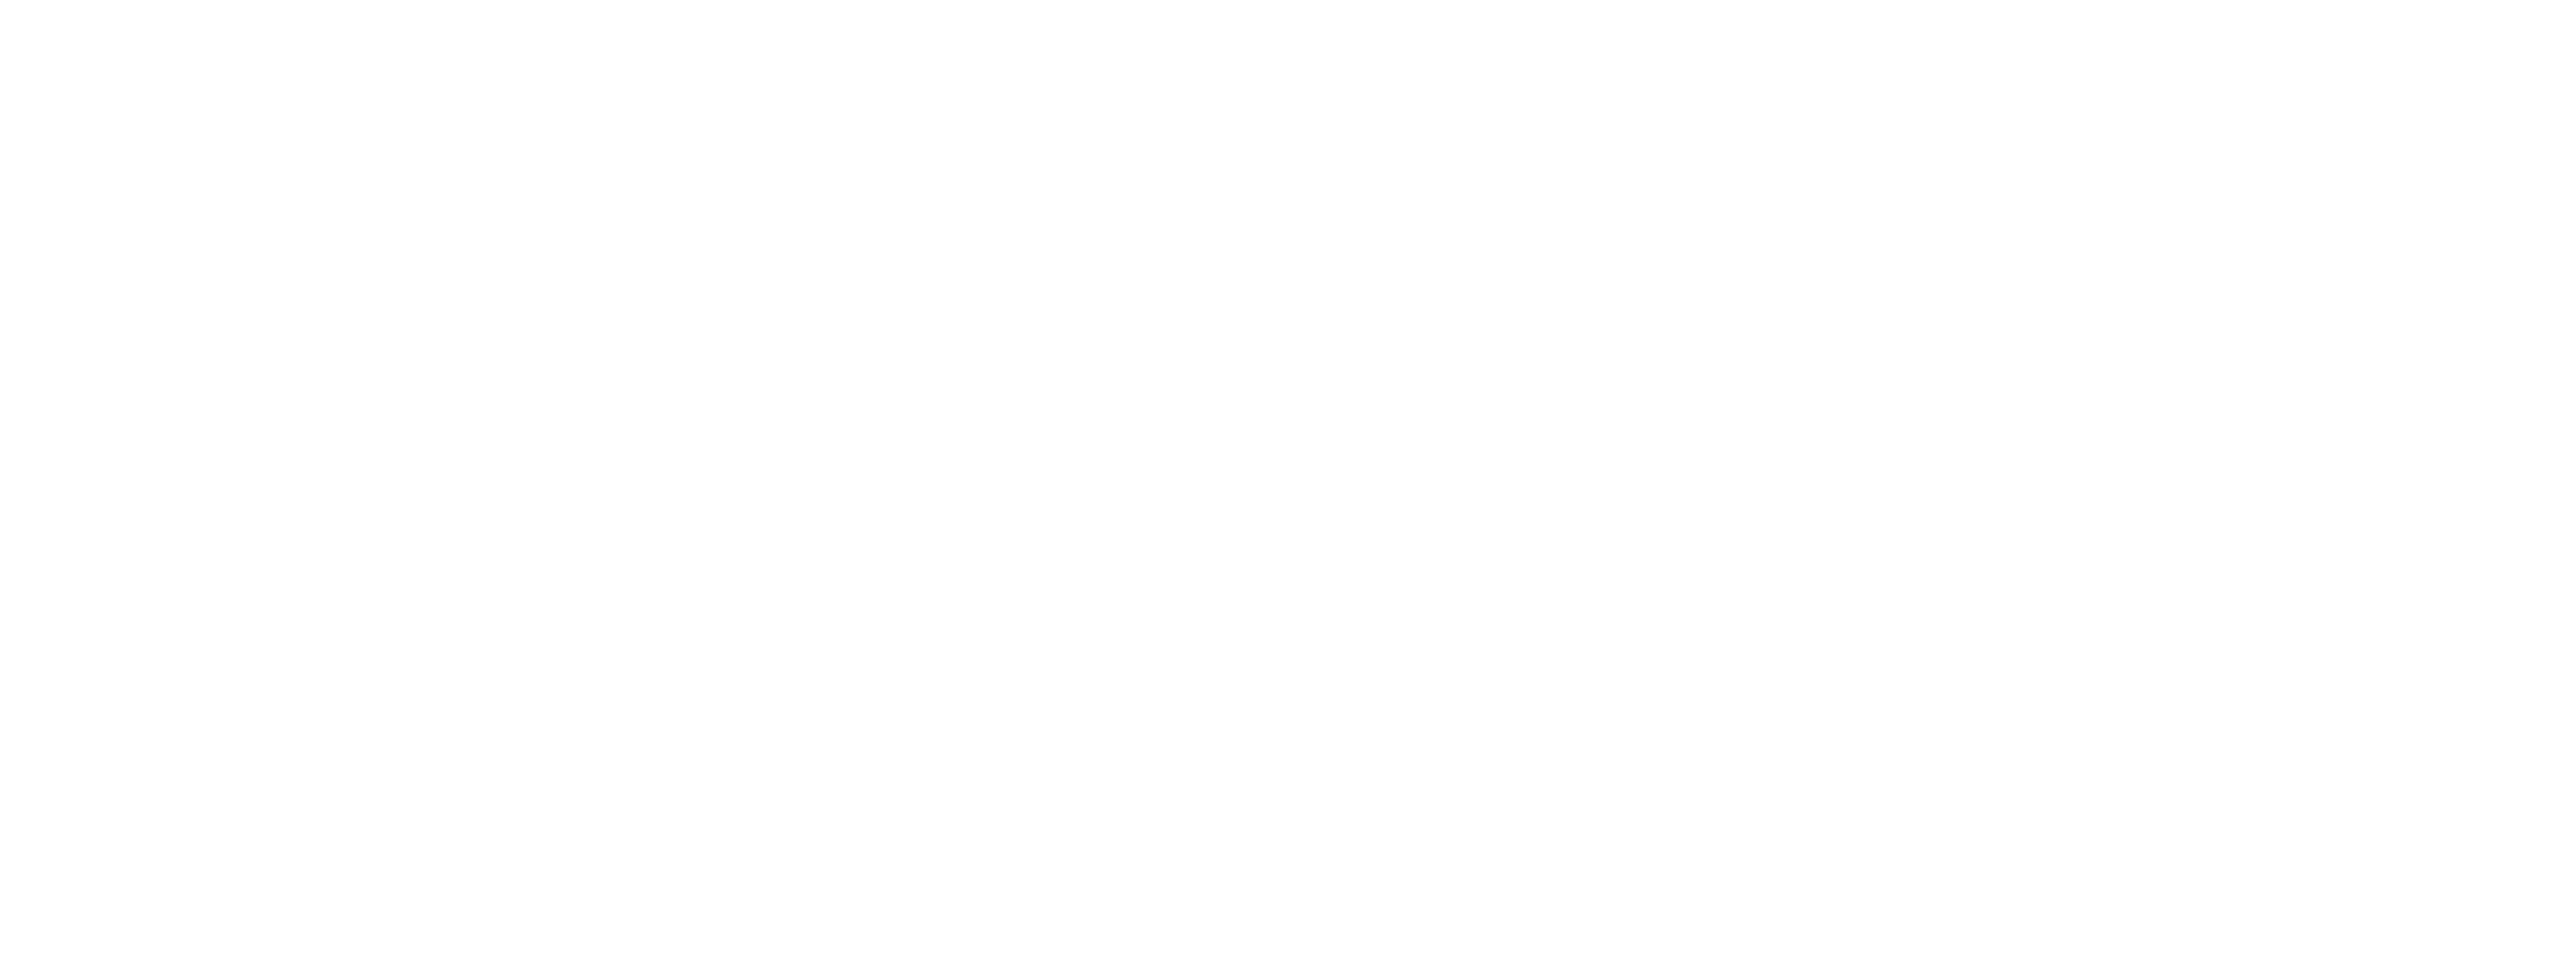 Aspire Peterborough Young People’s Service logo in white